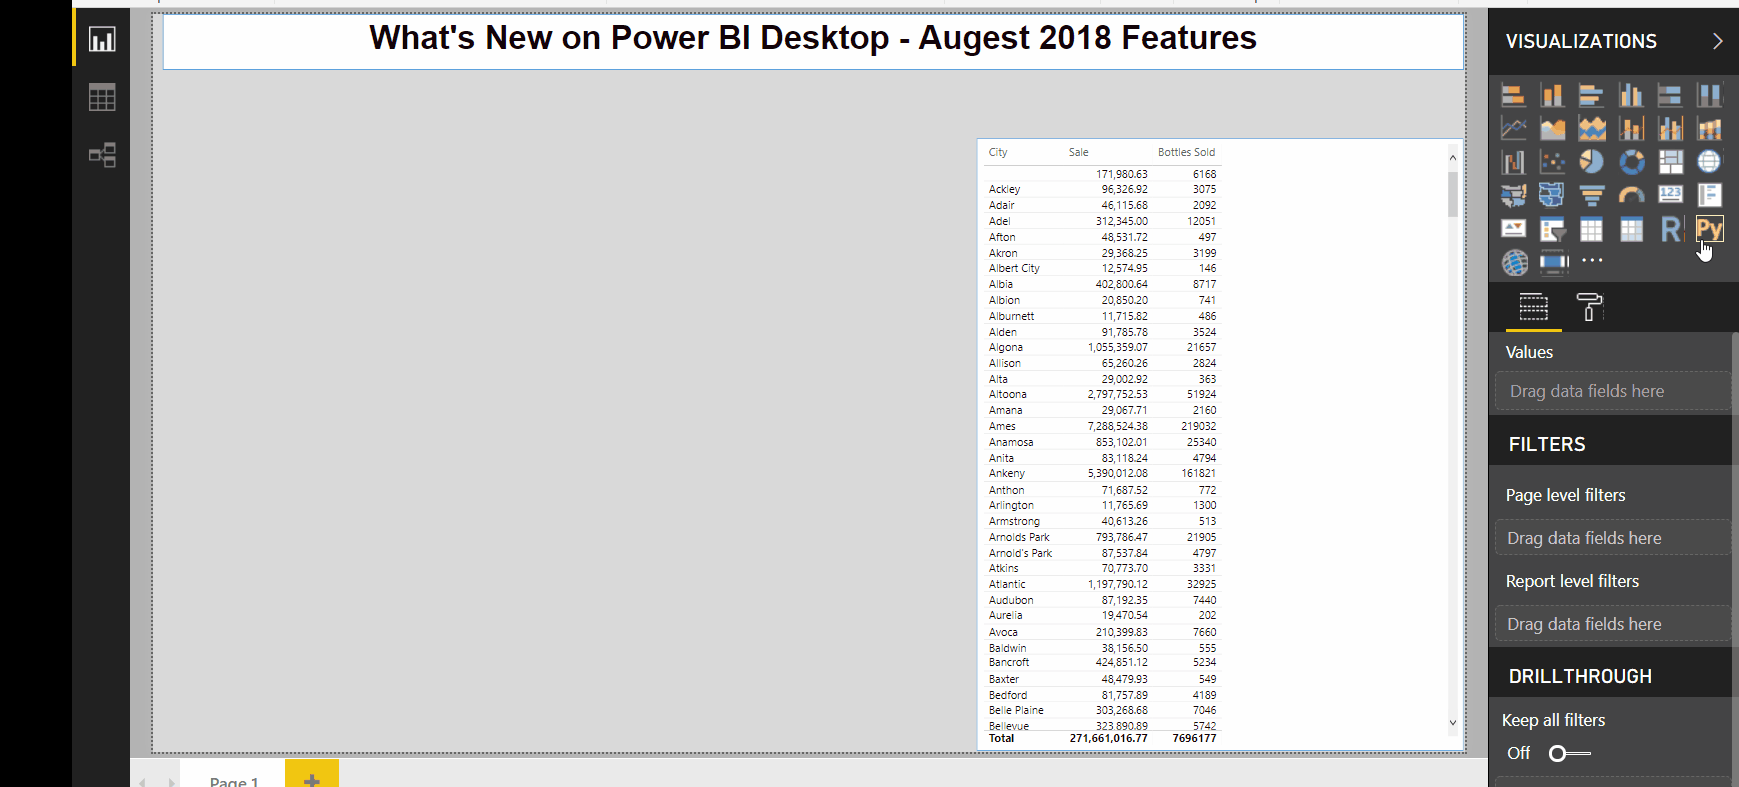 What's new on Power BI